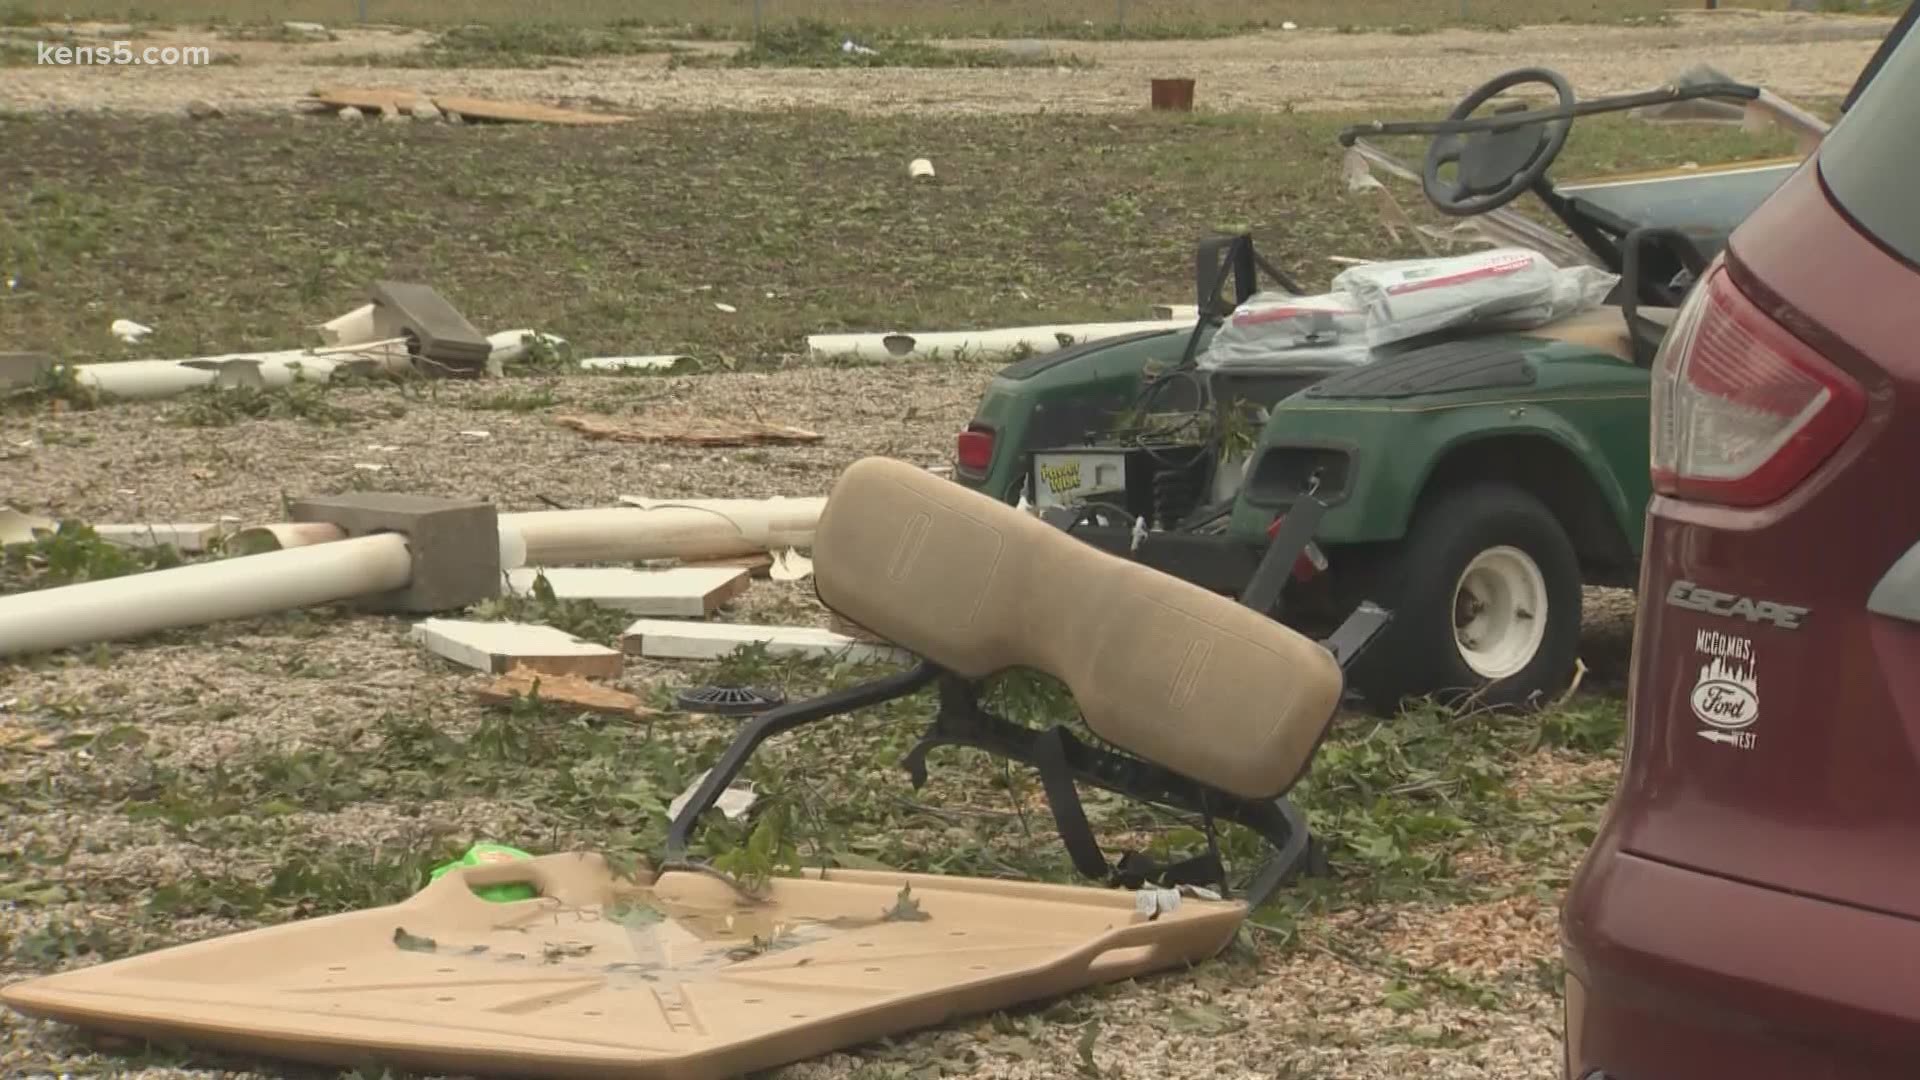 Destroyed roofs, cars, windows and trees represent just some of the aftermath from Wednesday's destructive storms.